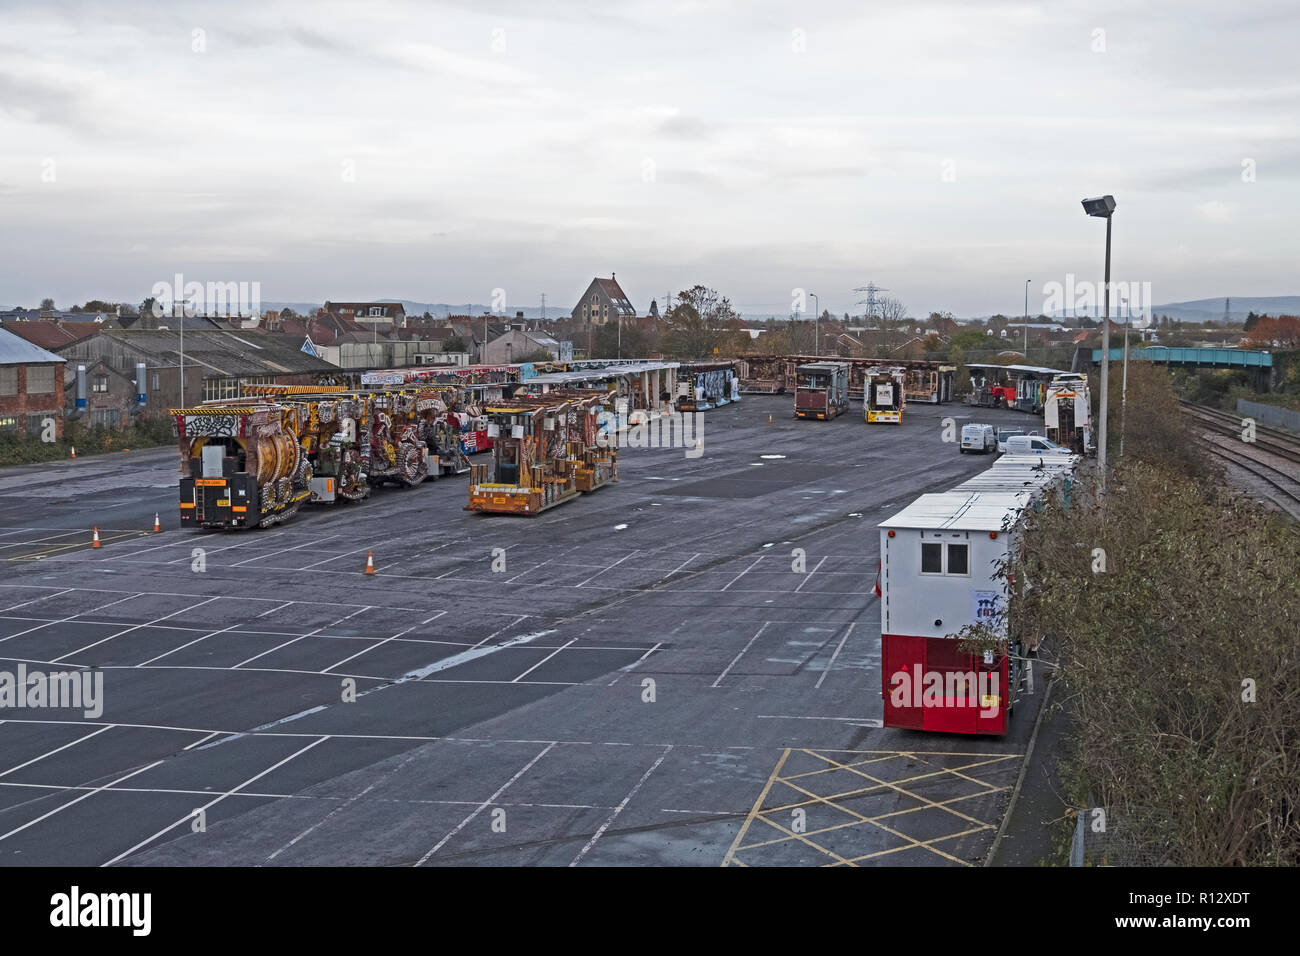 Weston-super-Mare, UK. 8th November, 2018. Carts which will take part in the annual illuminated carnival arrive in a car park in the town centre. The carnival, which will start at 19.15 on 9th November 2018, is one of a series held throughout Somerset and showcases the work of local carnival clubs which have spent most of the past year designing and building their carts. Keith Ramsey/Alamy Live News Stock Photo